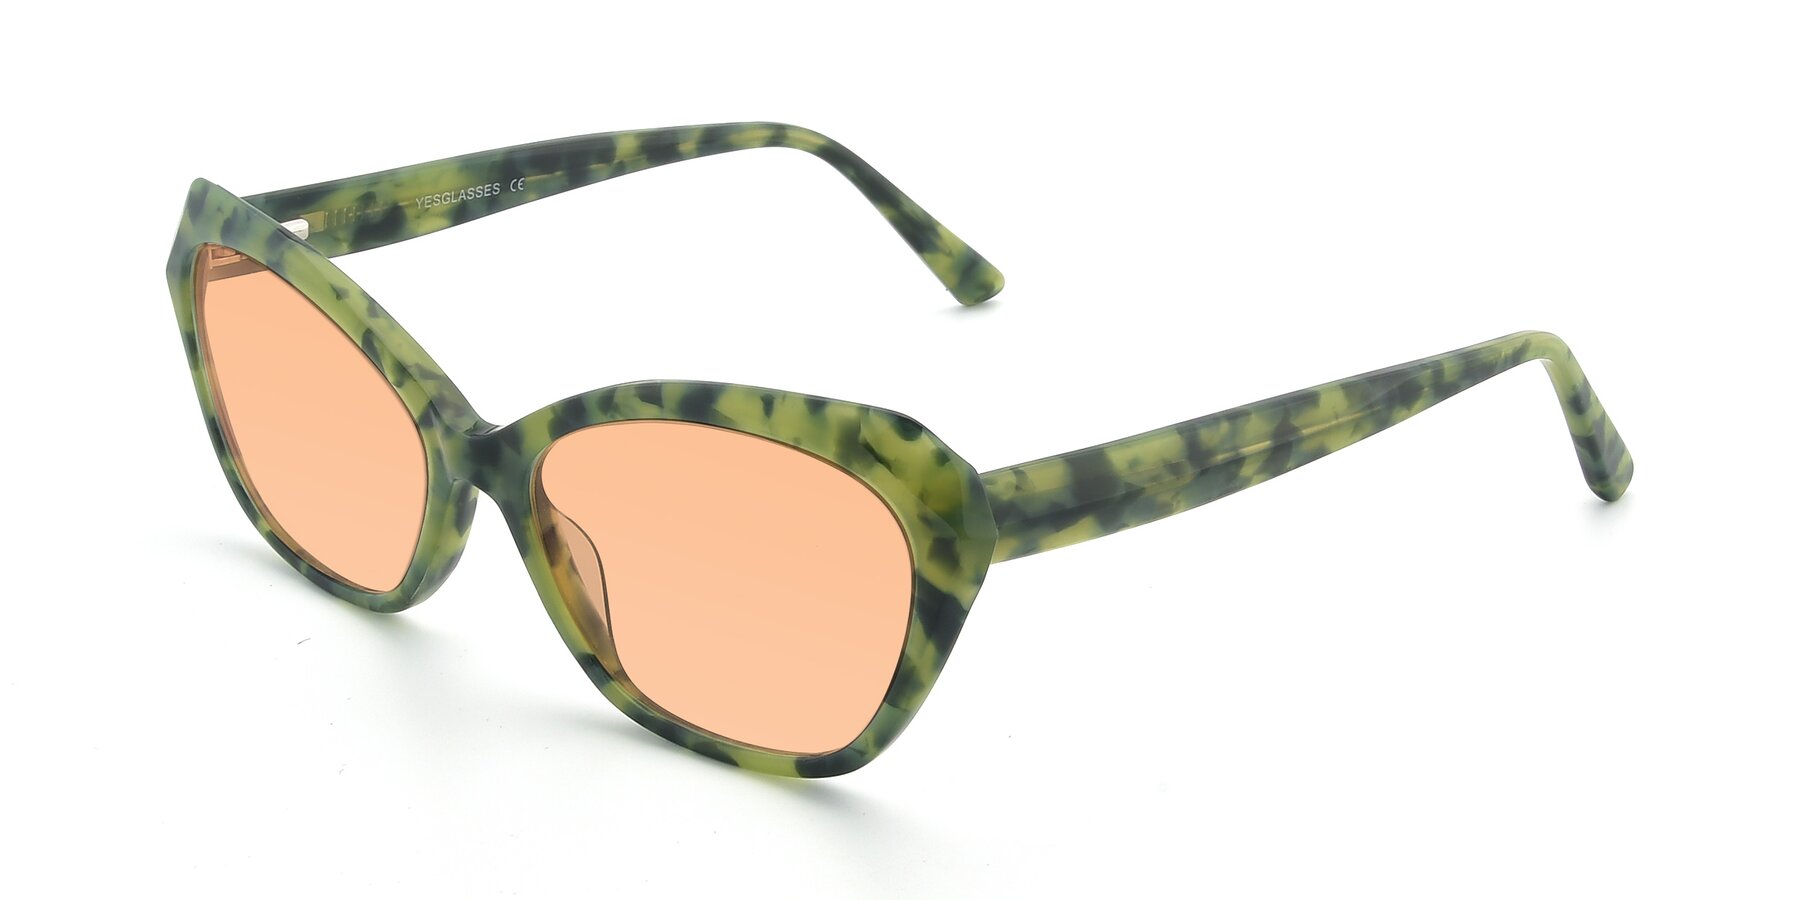 Angle of 17351 in Floral Green with Light Orange Tinted Lenses